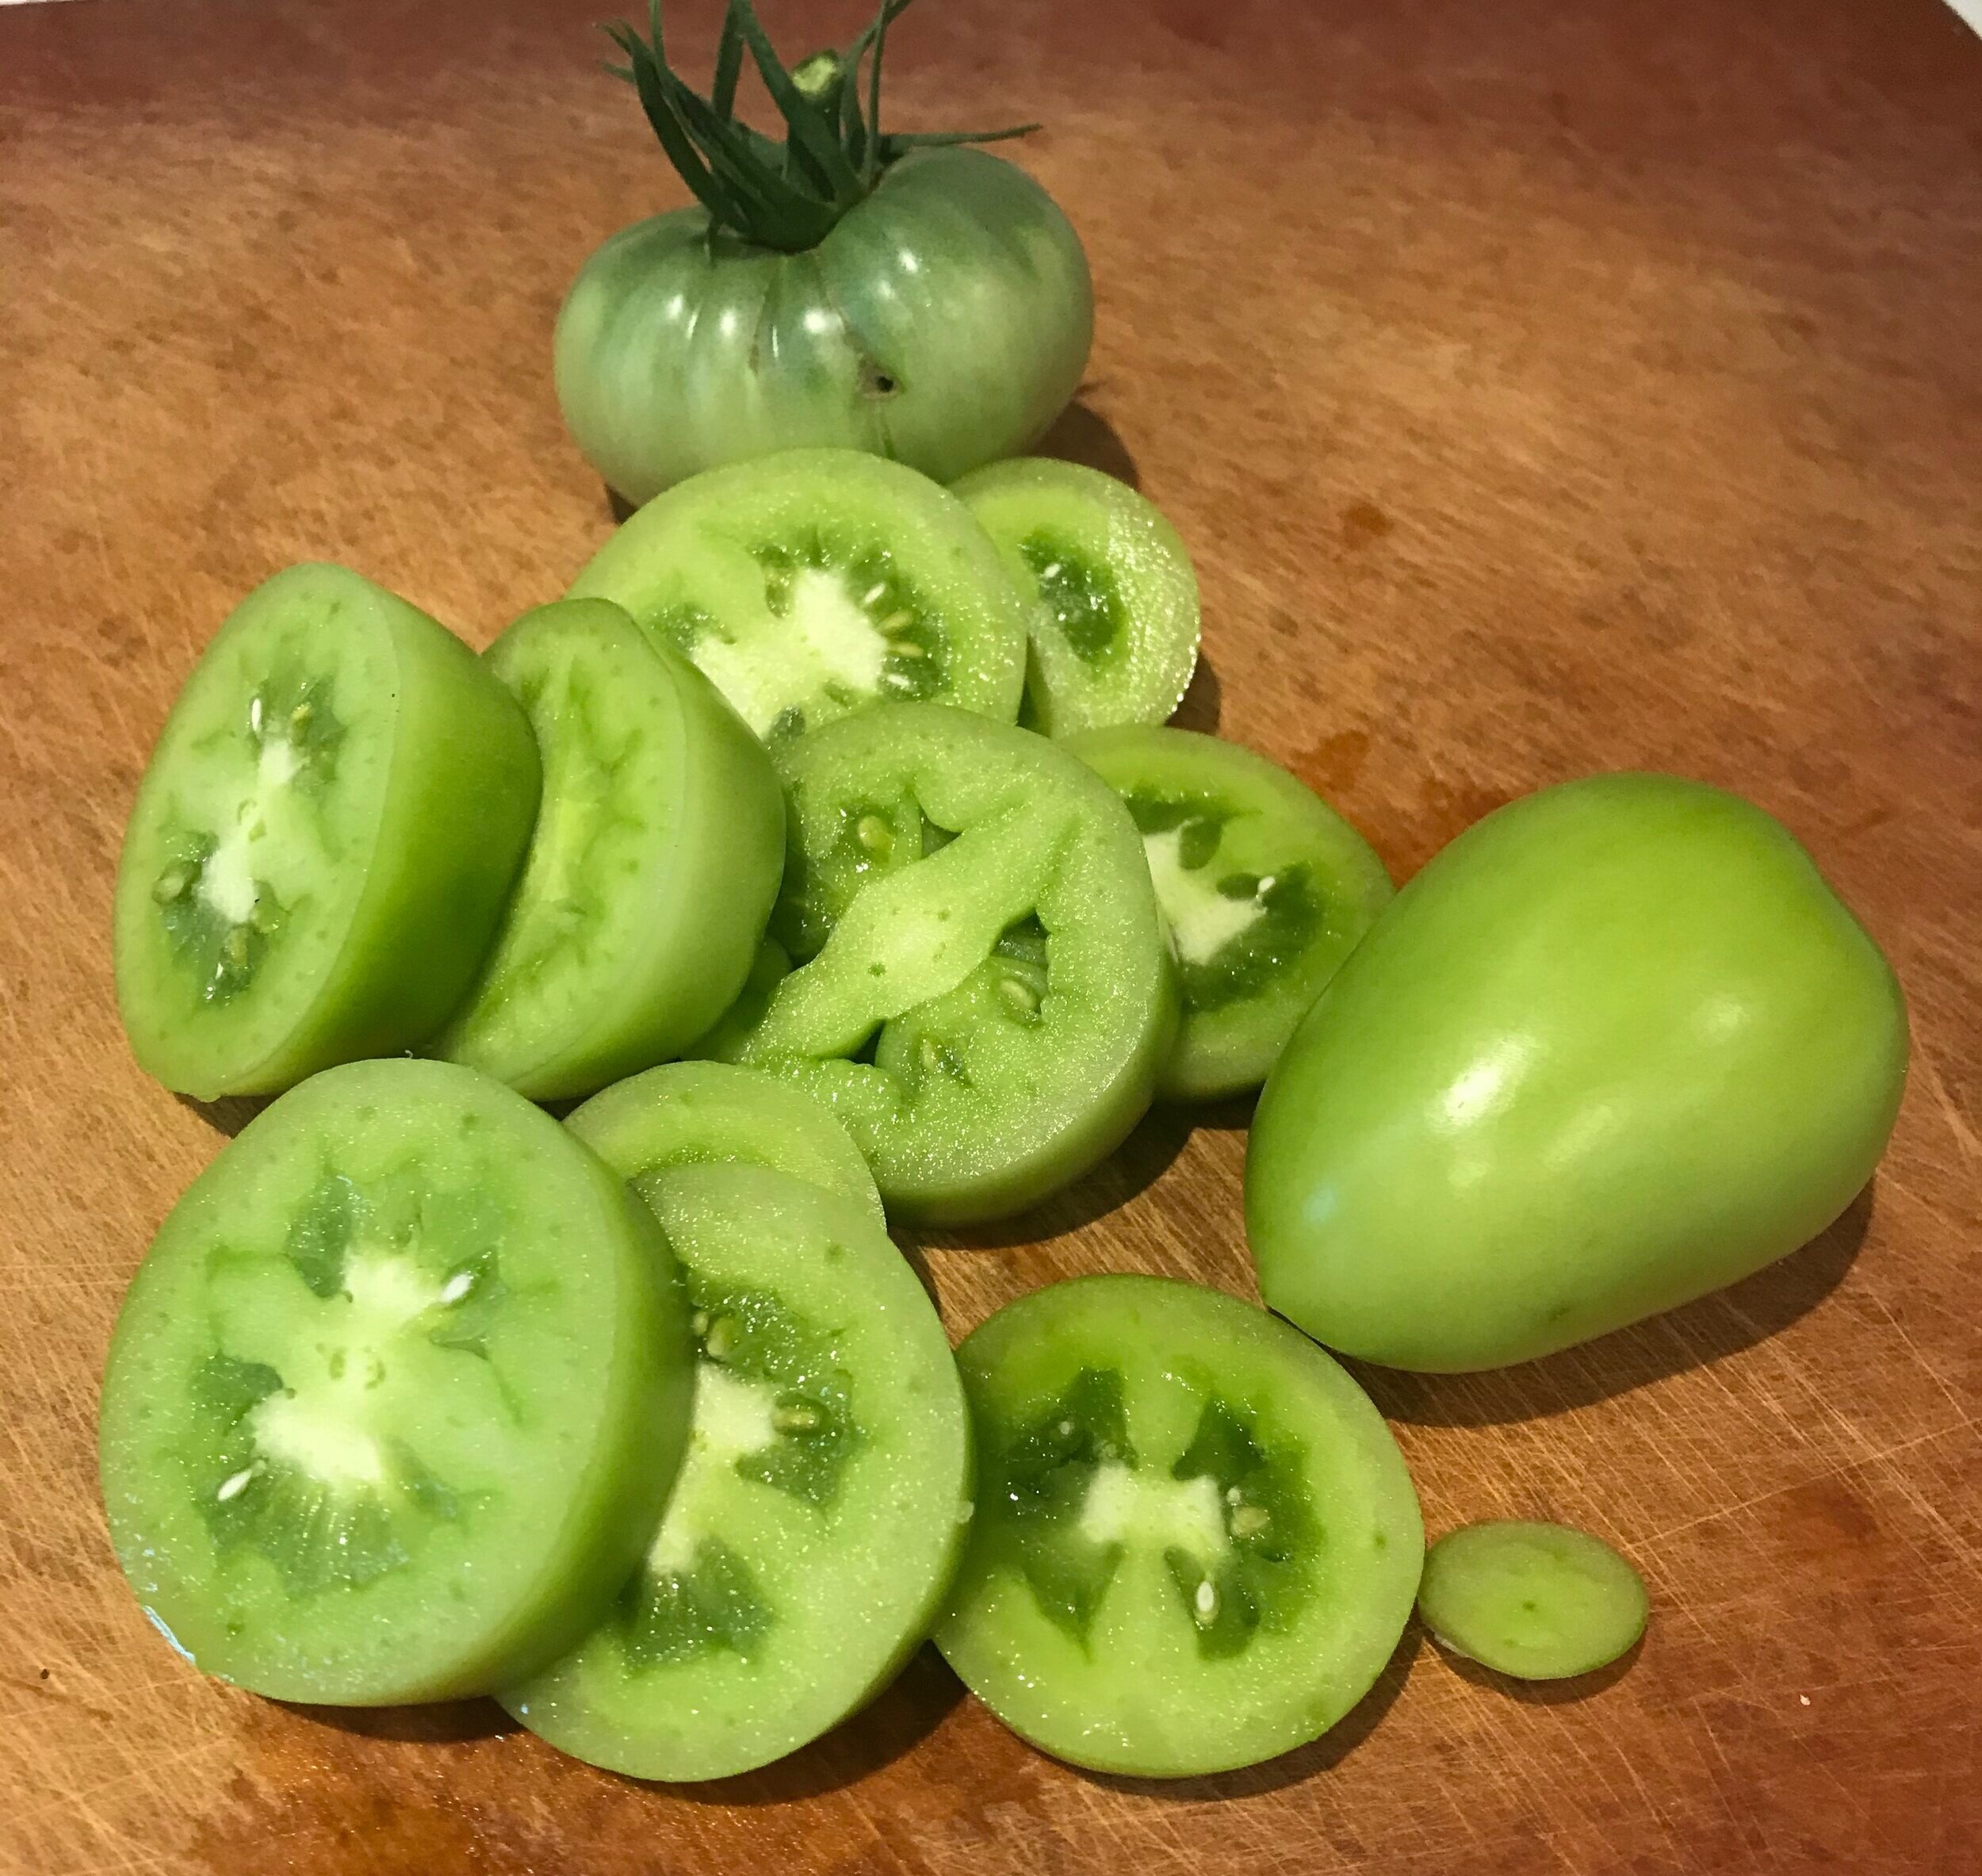 Does the green tomato have any health benefits for men?